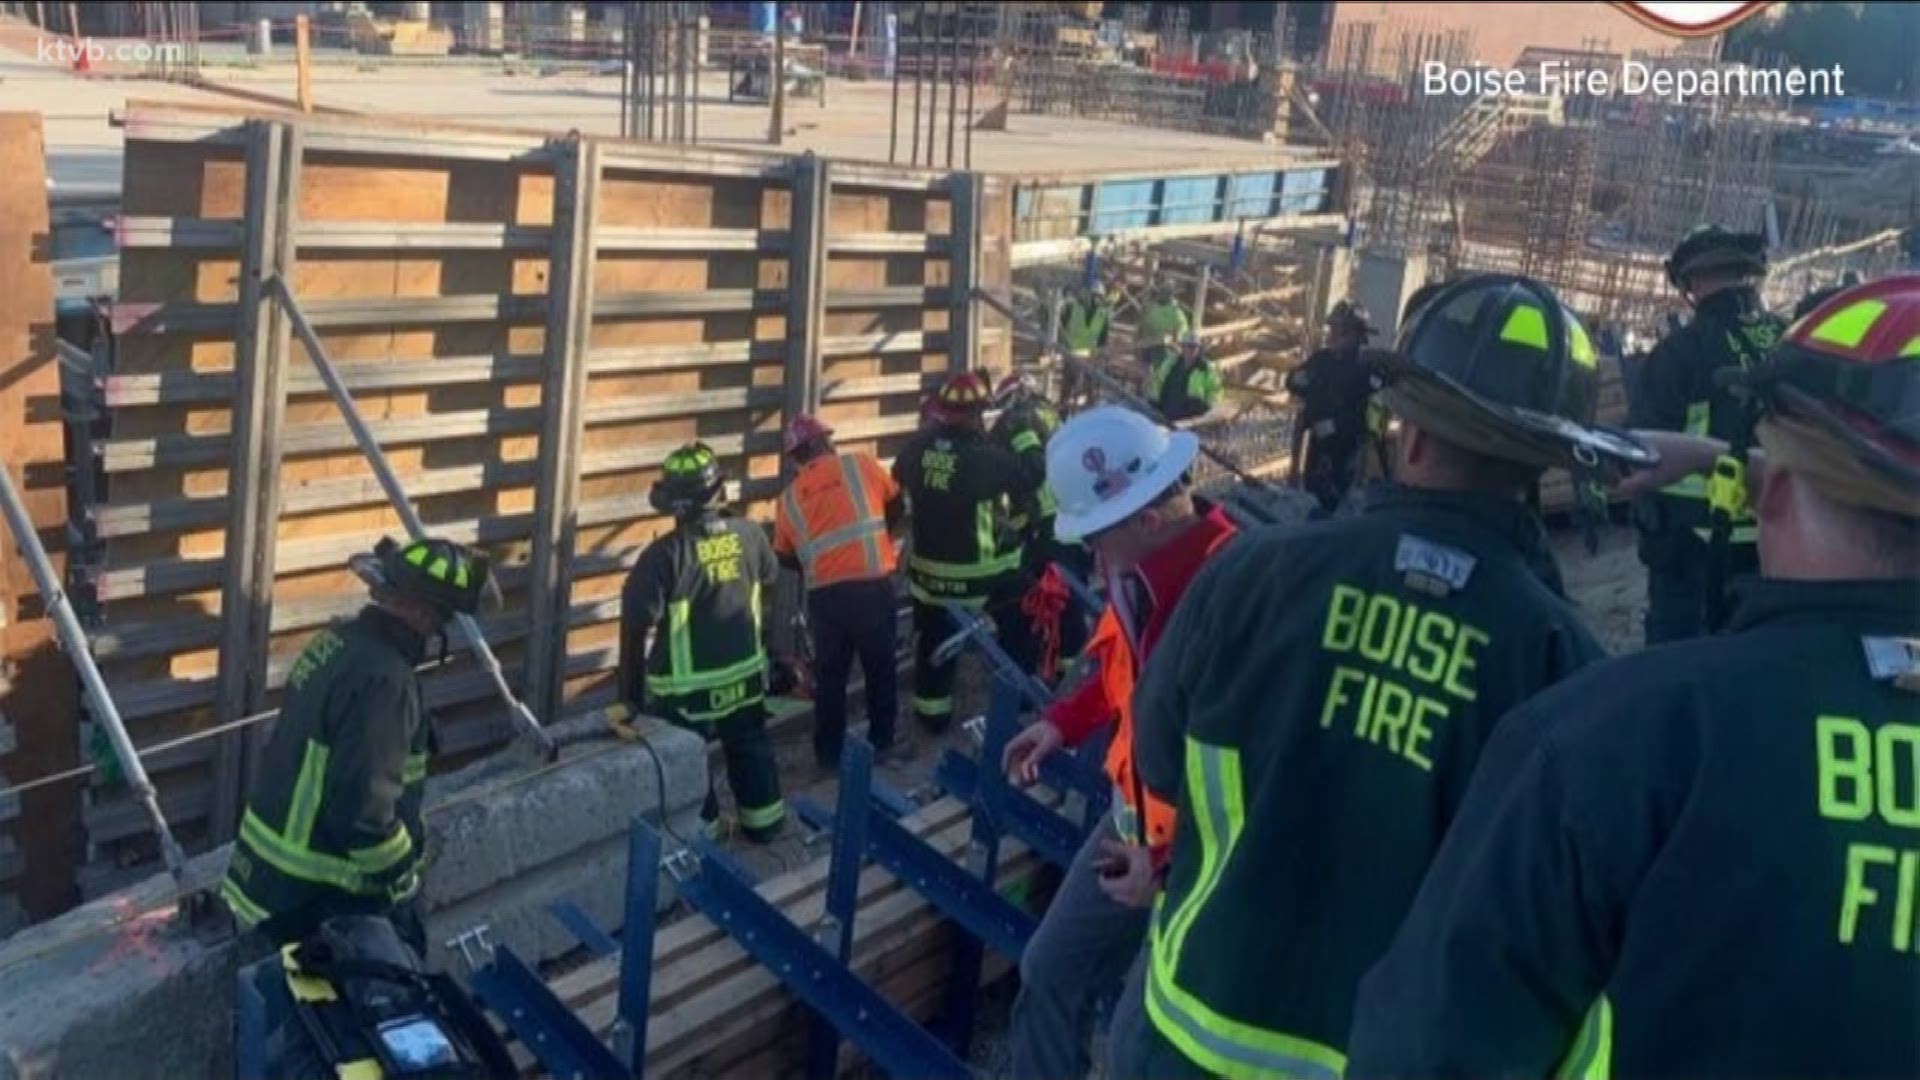 The worker's foot was pinned under a 2,000 pound retaining wall, officials said.